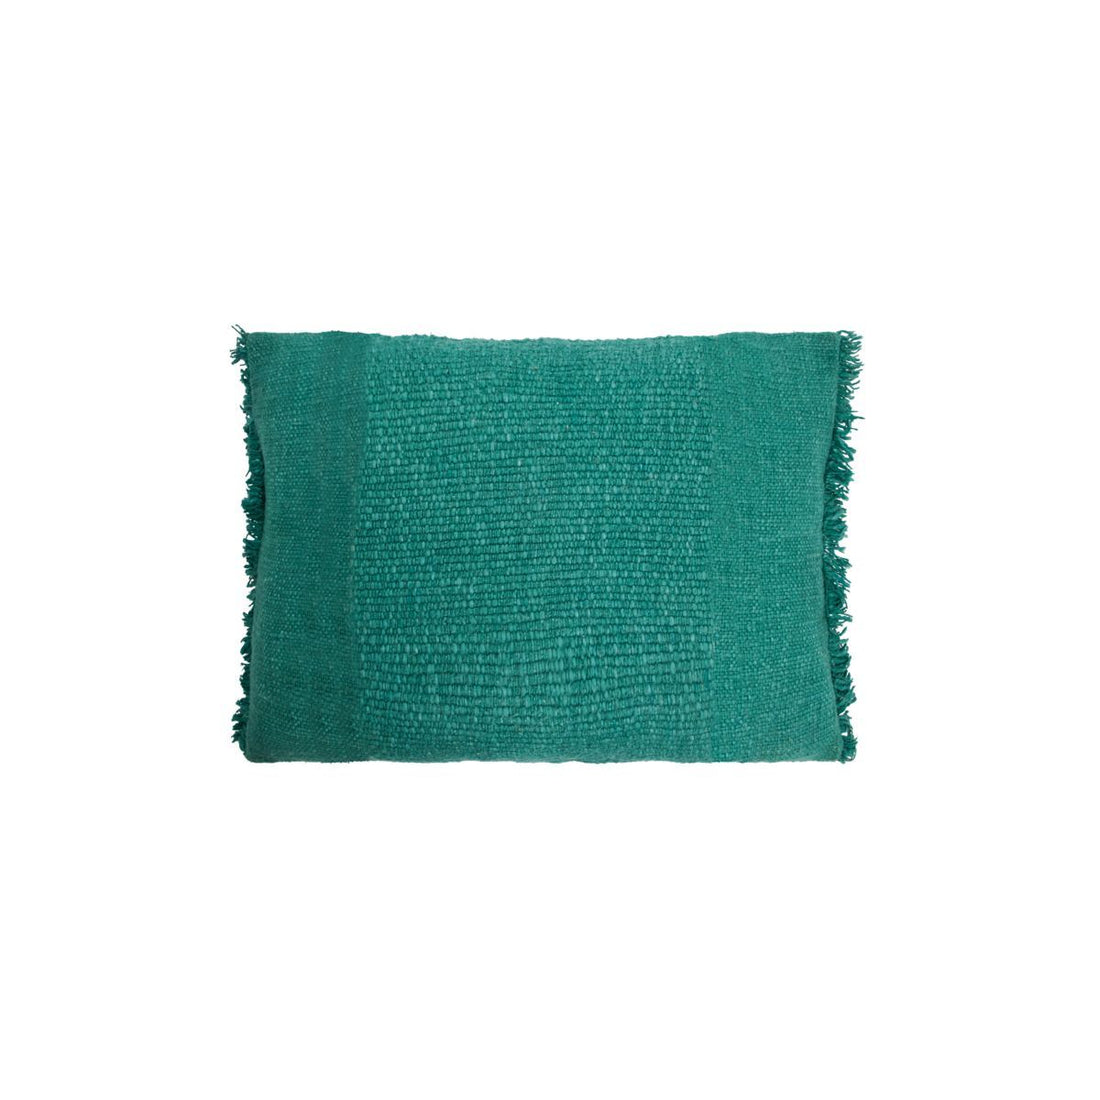 House Doctor Pillow Covers, Hdfrig, Green